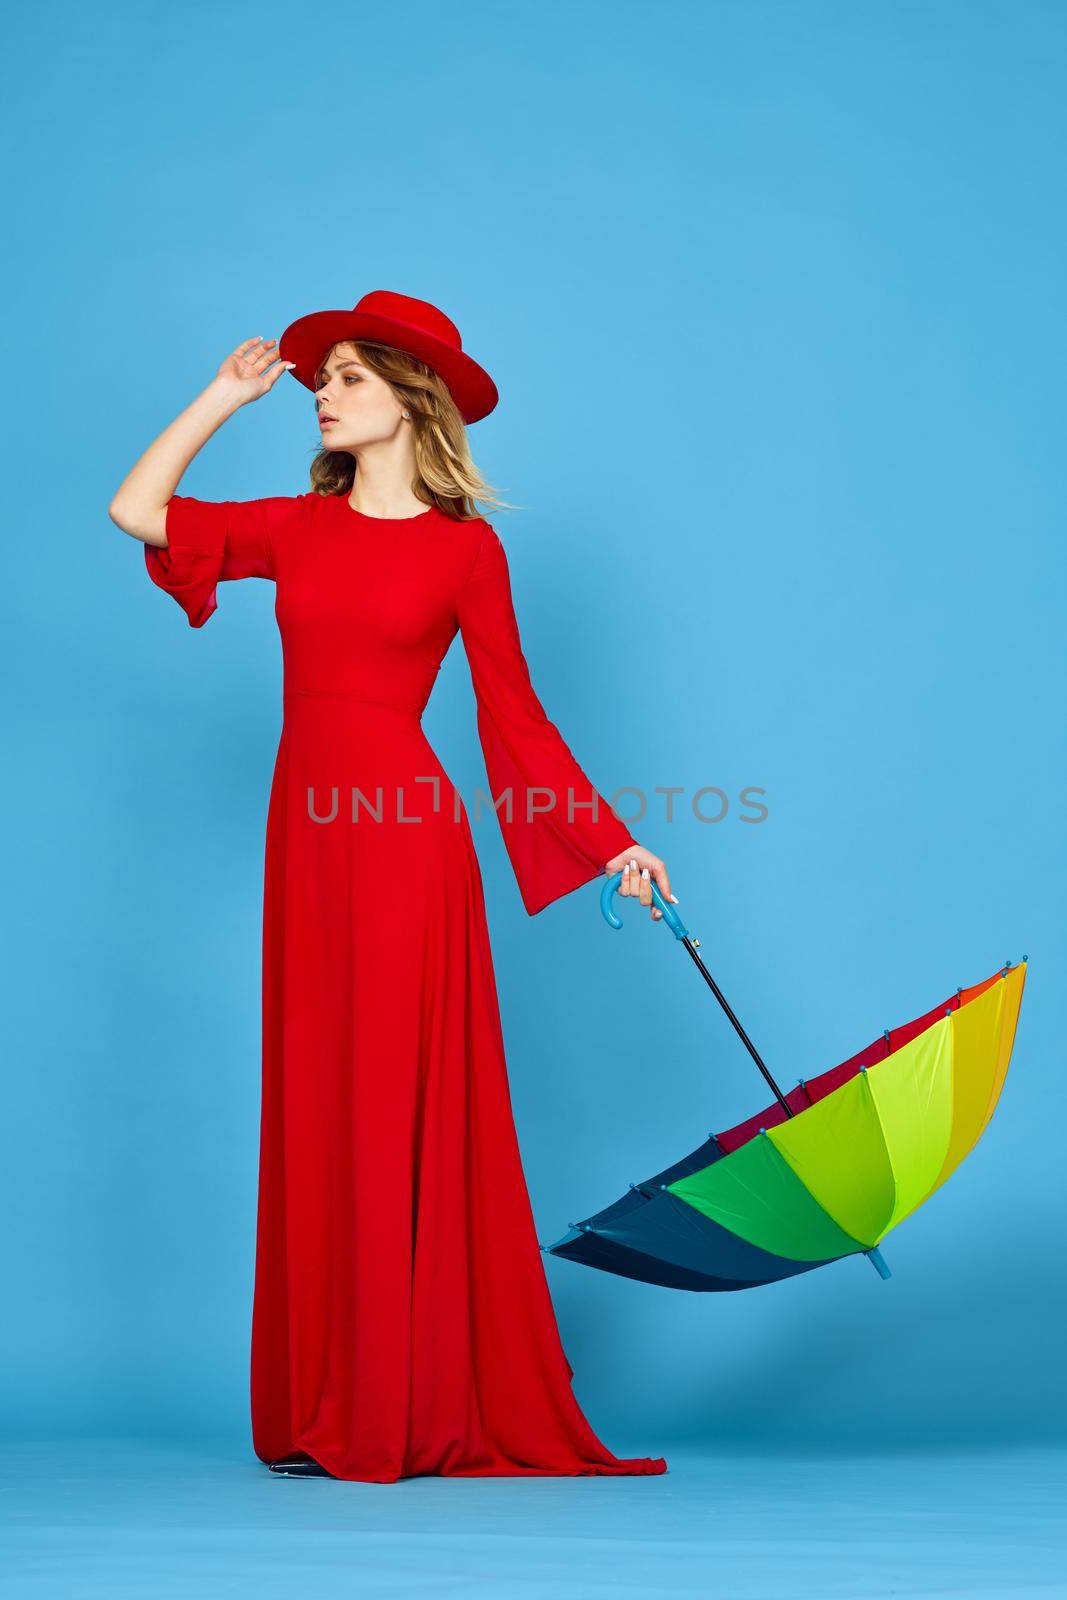 woman in red dress multicolored umbrella blue background. High quality photo